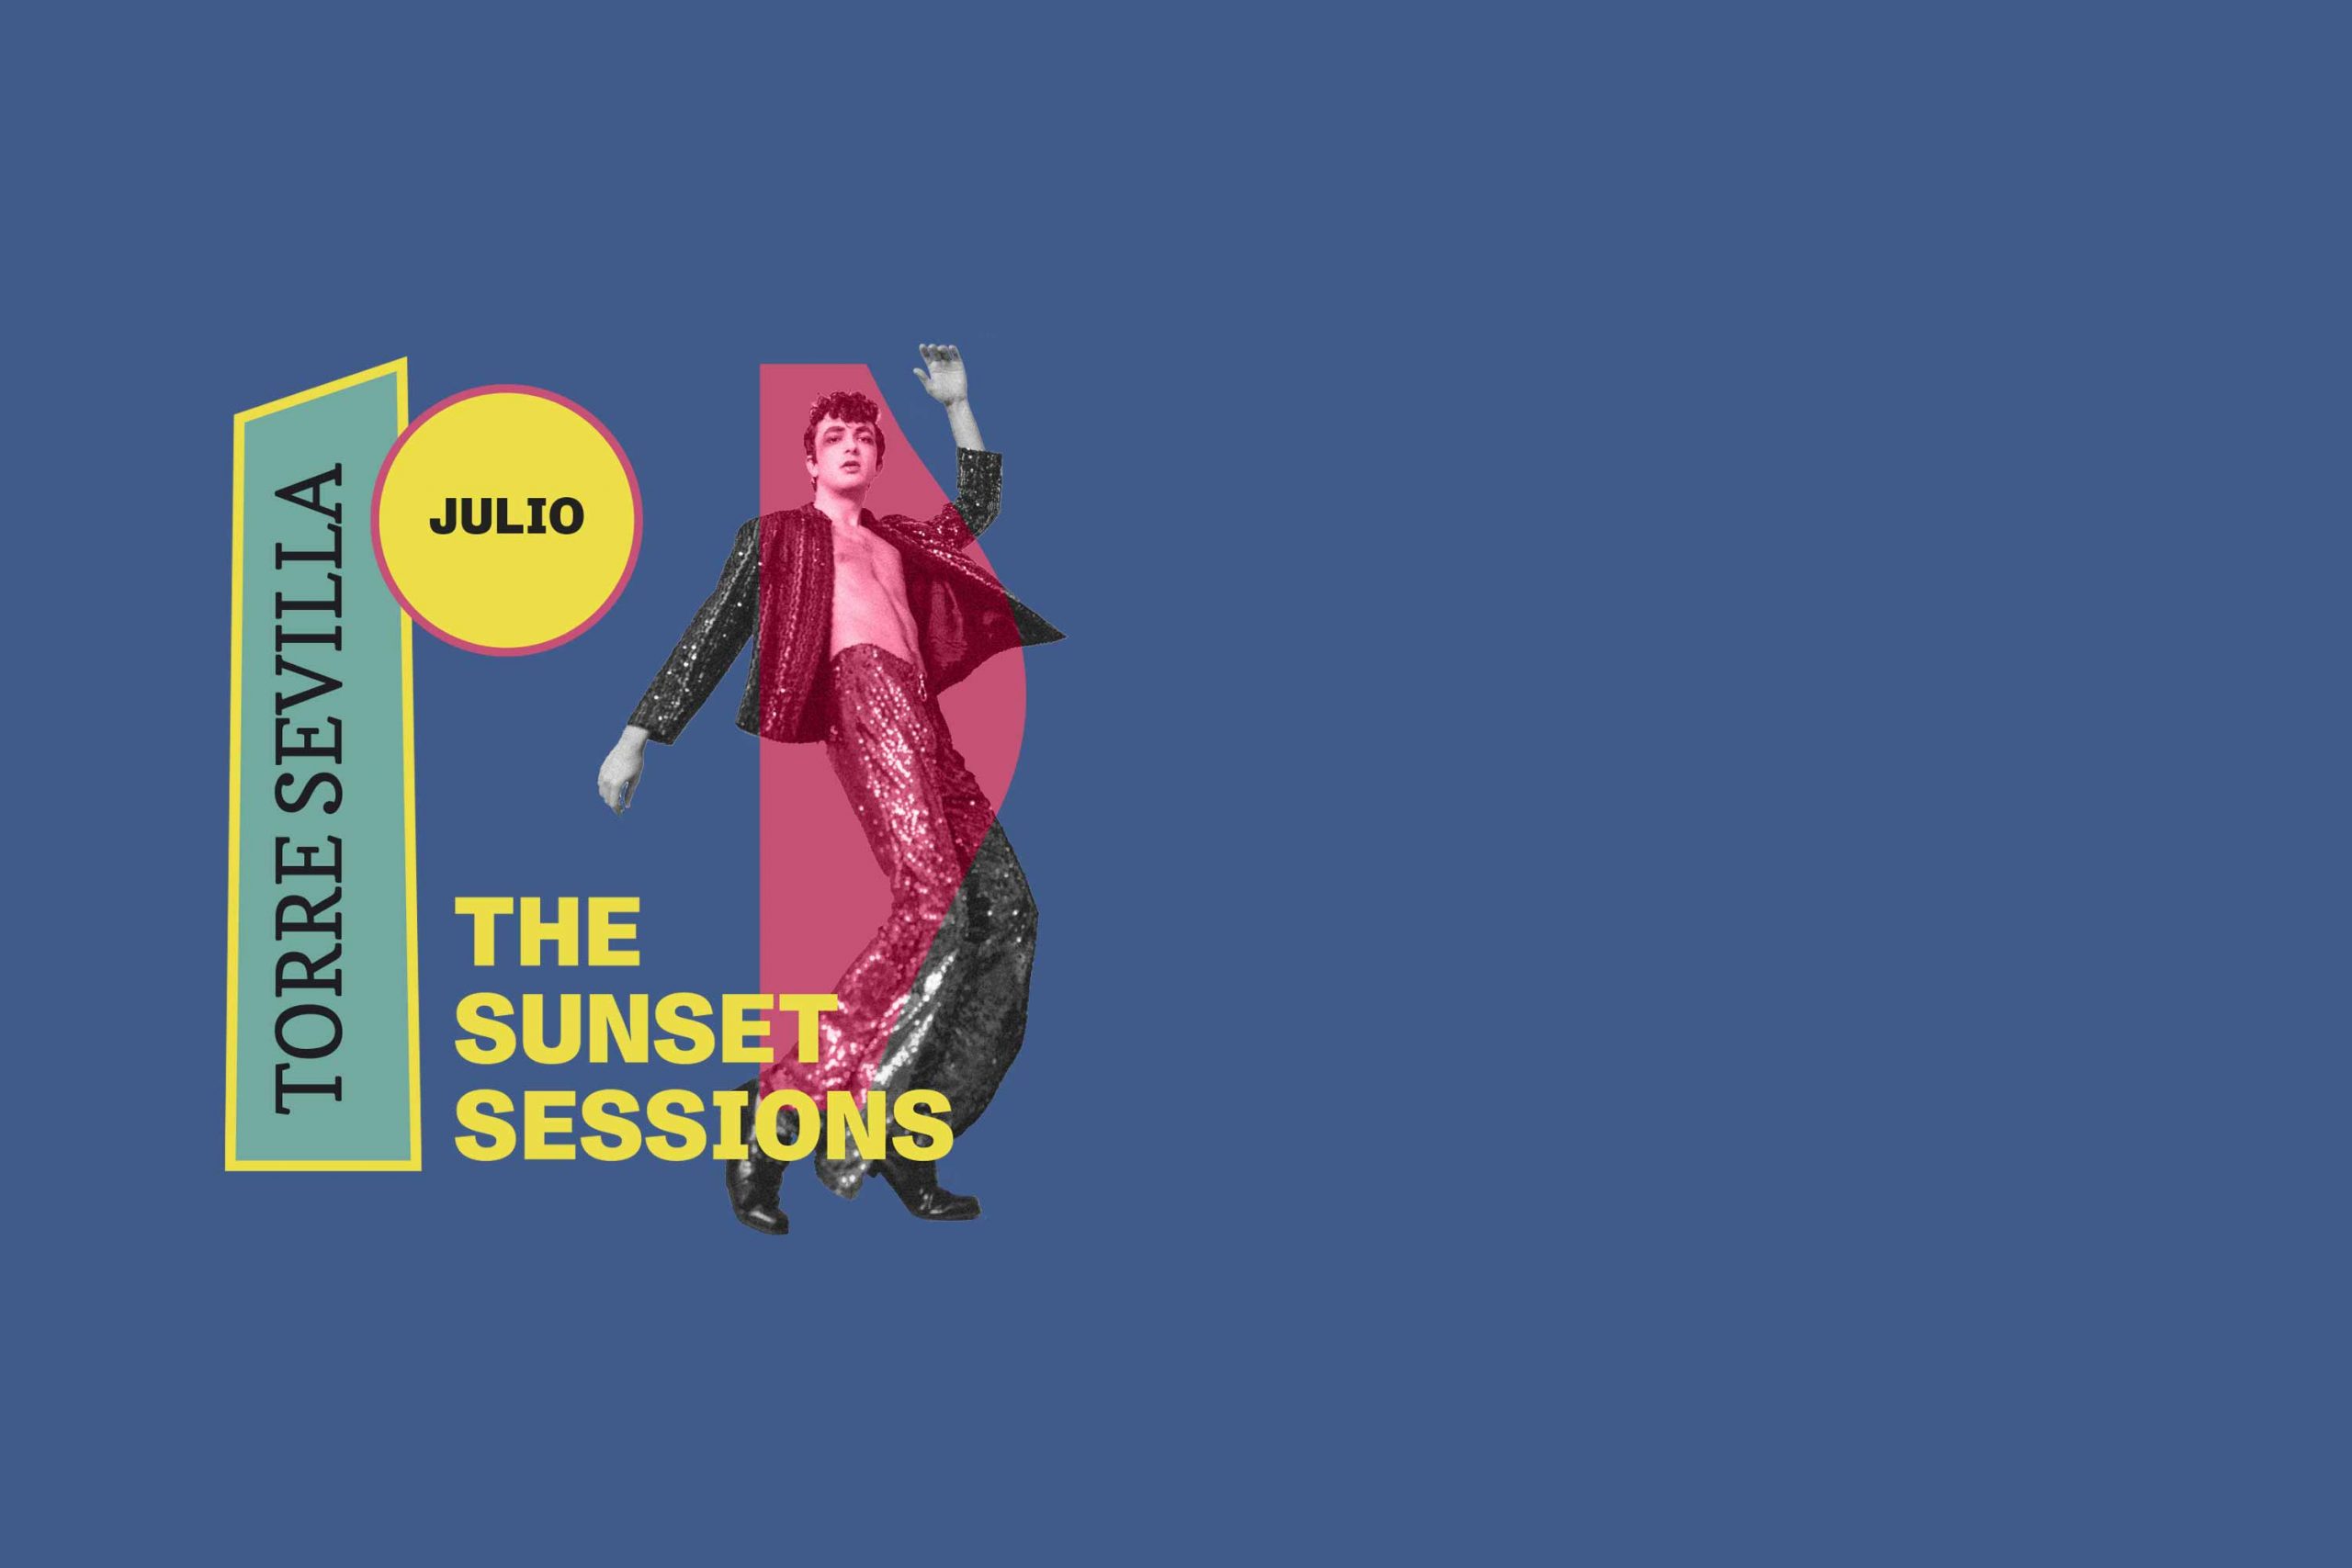 THE SUNSET SESSIONS